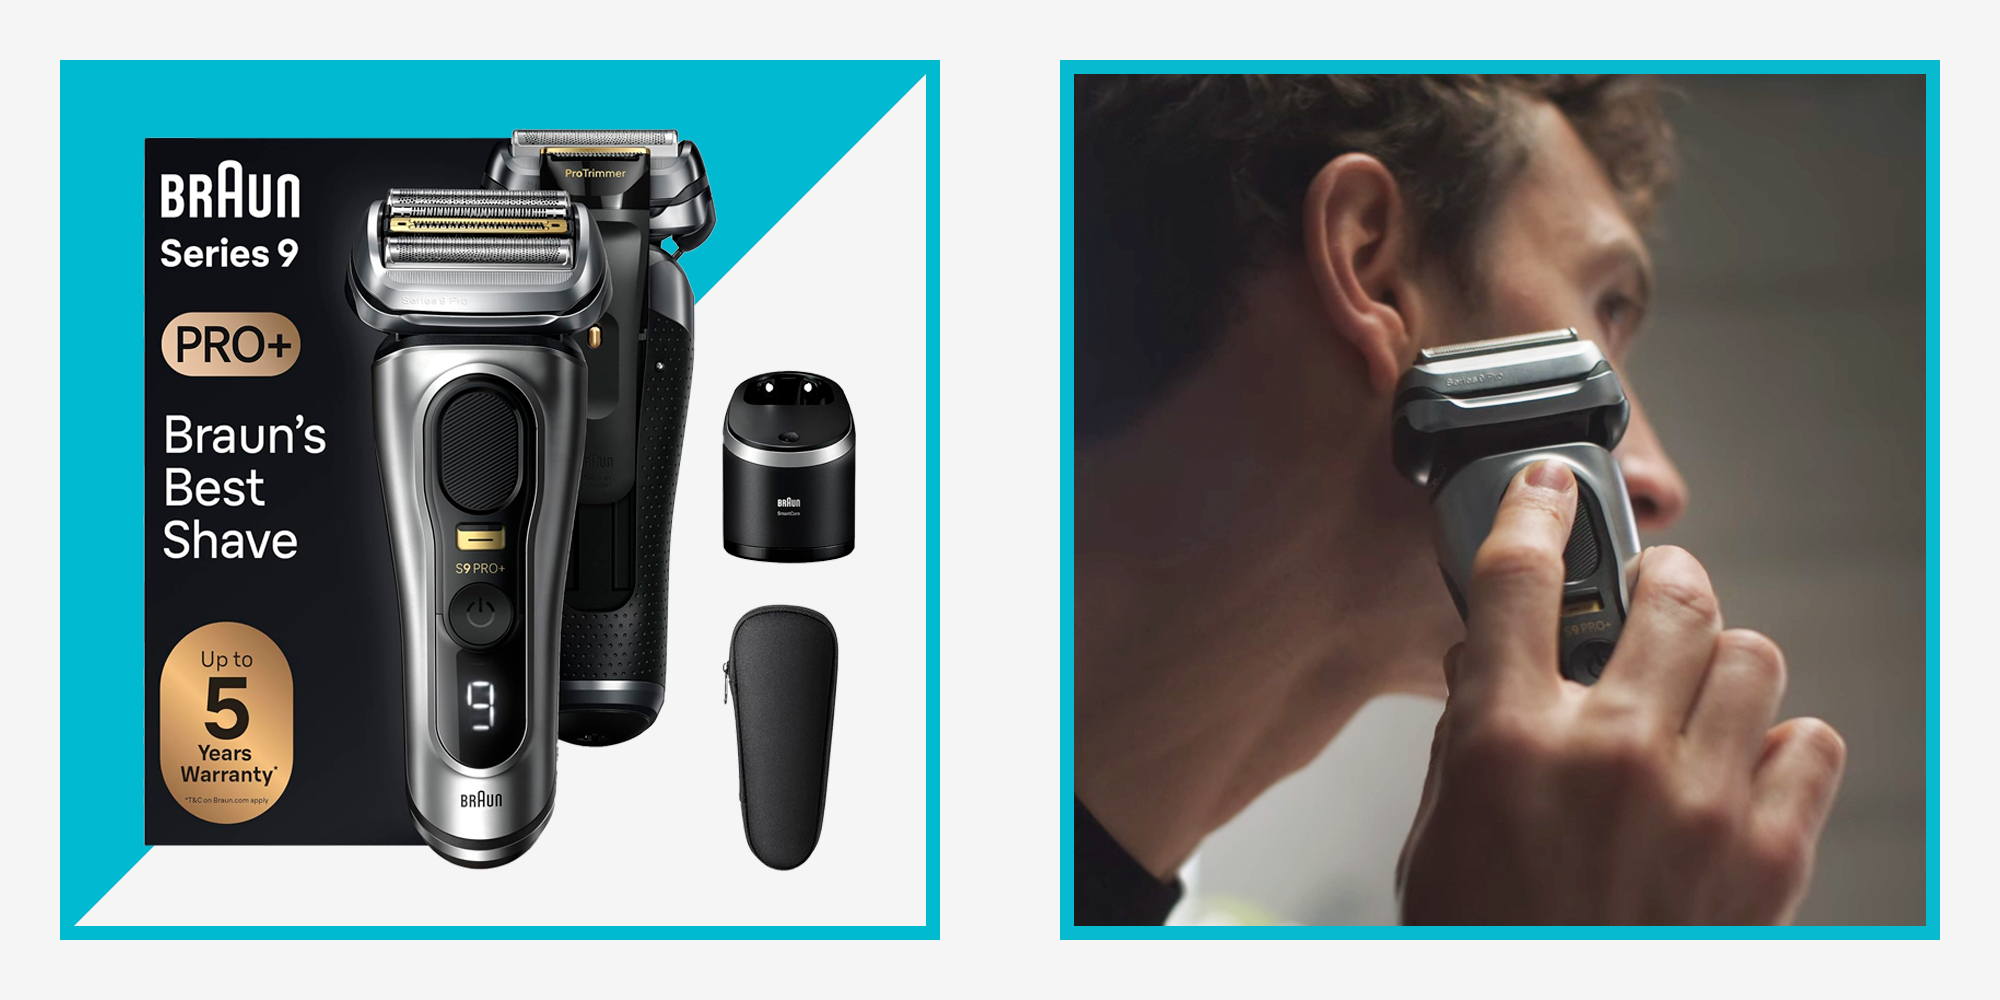 Braun Series 9 Pro Electric Razor Review: The Closest, Most Efficient Shave